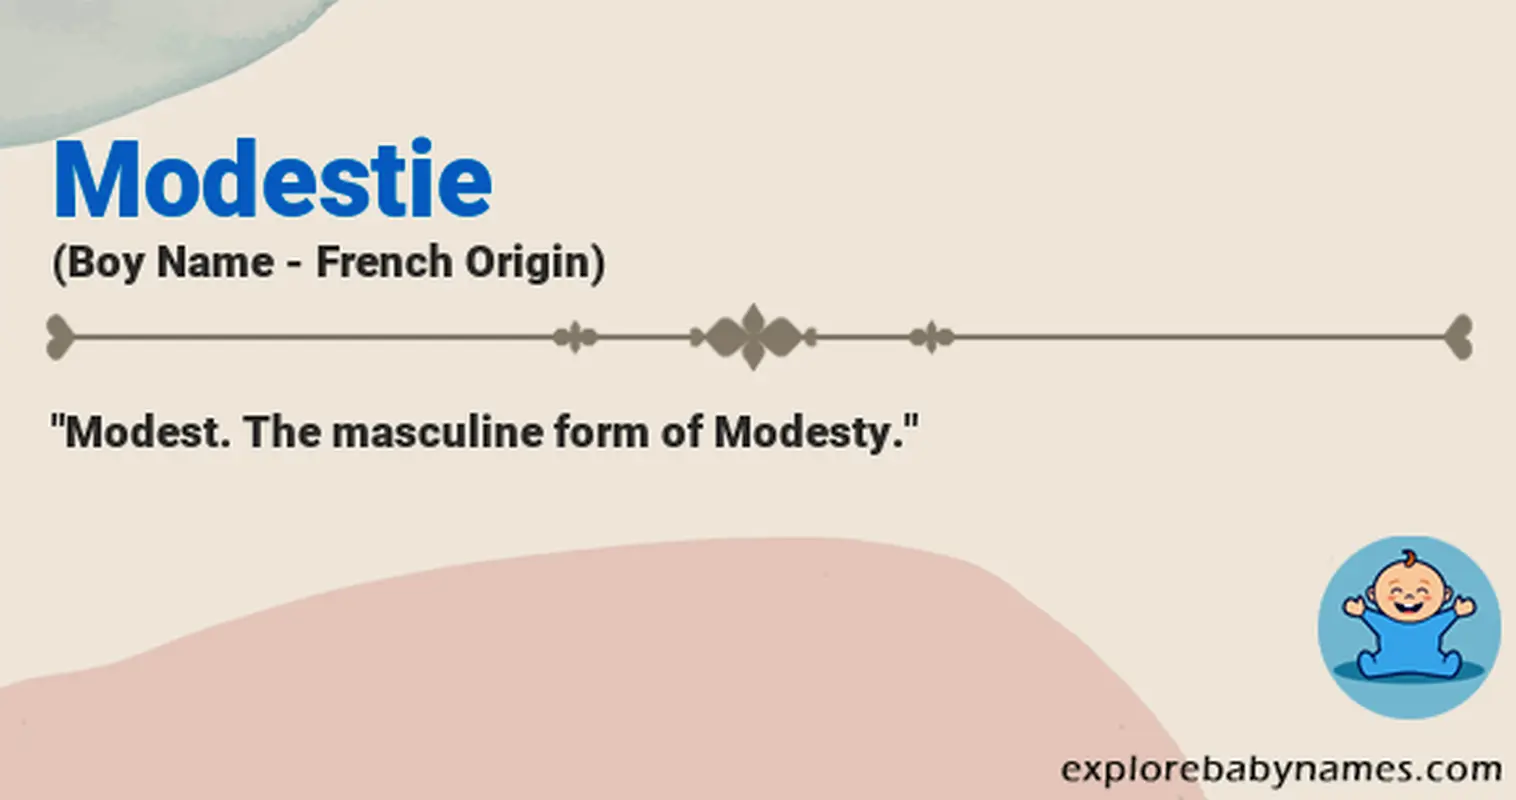 Meaning of Modestie